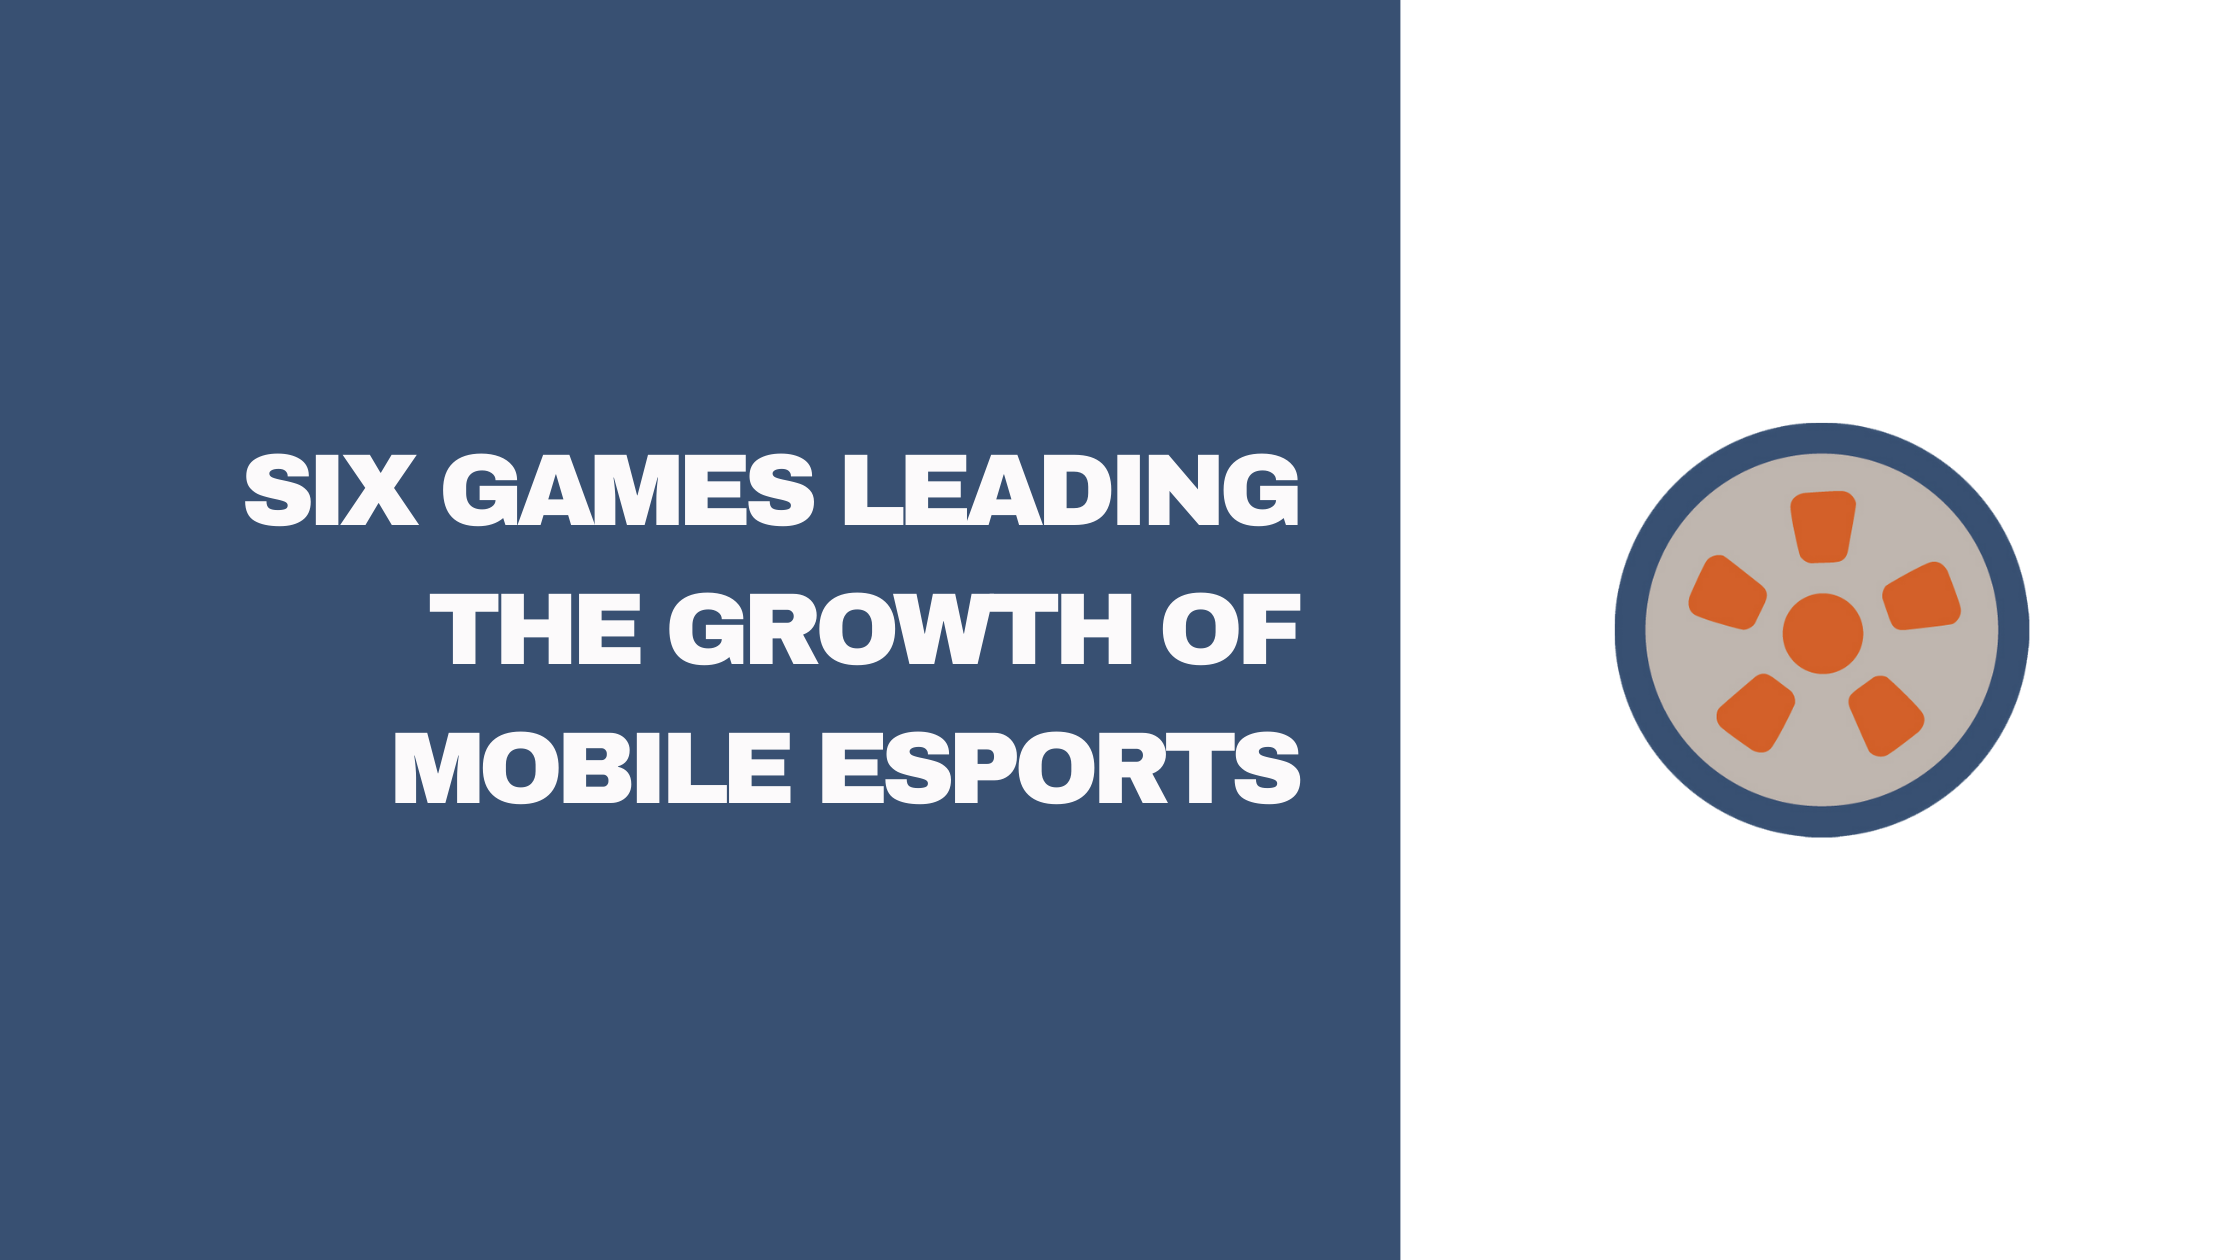 CoD Mobile $2 million World Championship 2022: How to compete